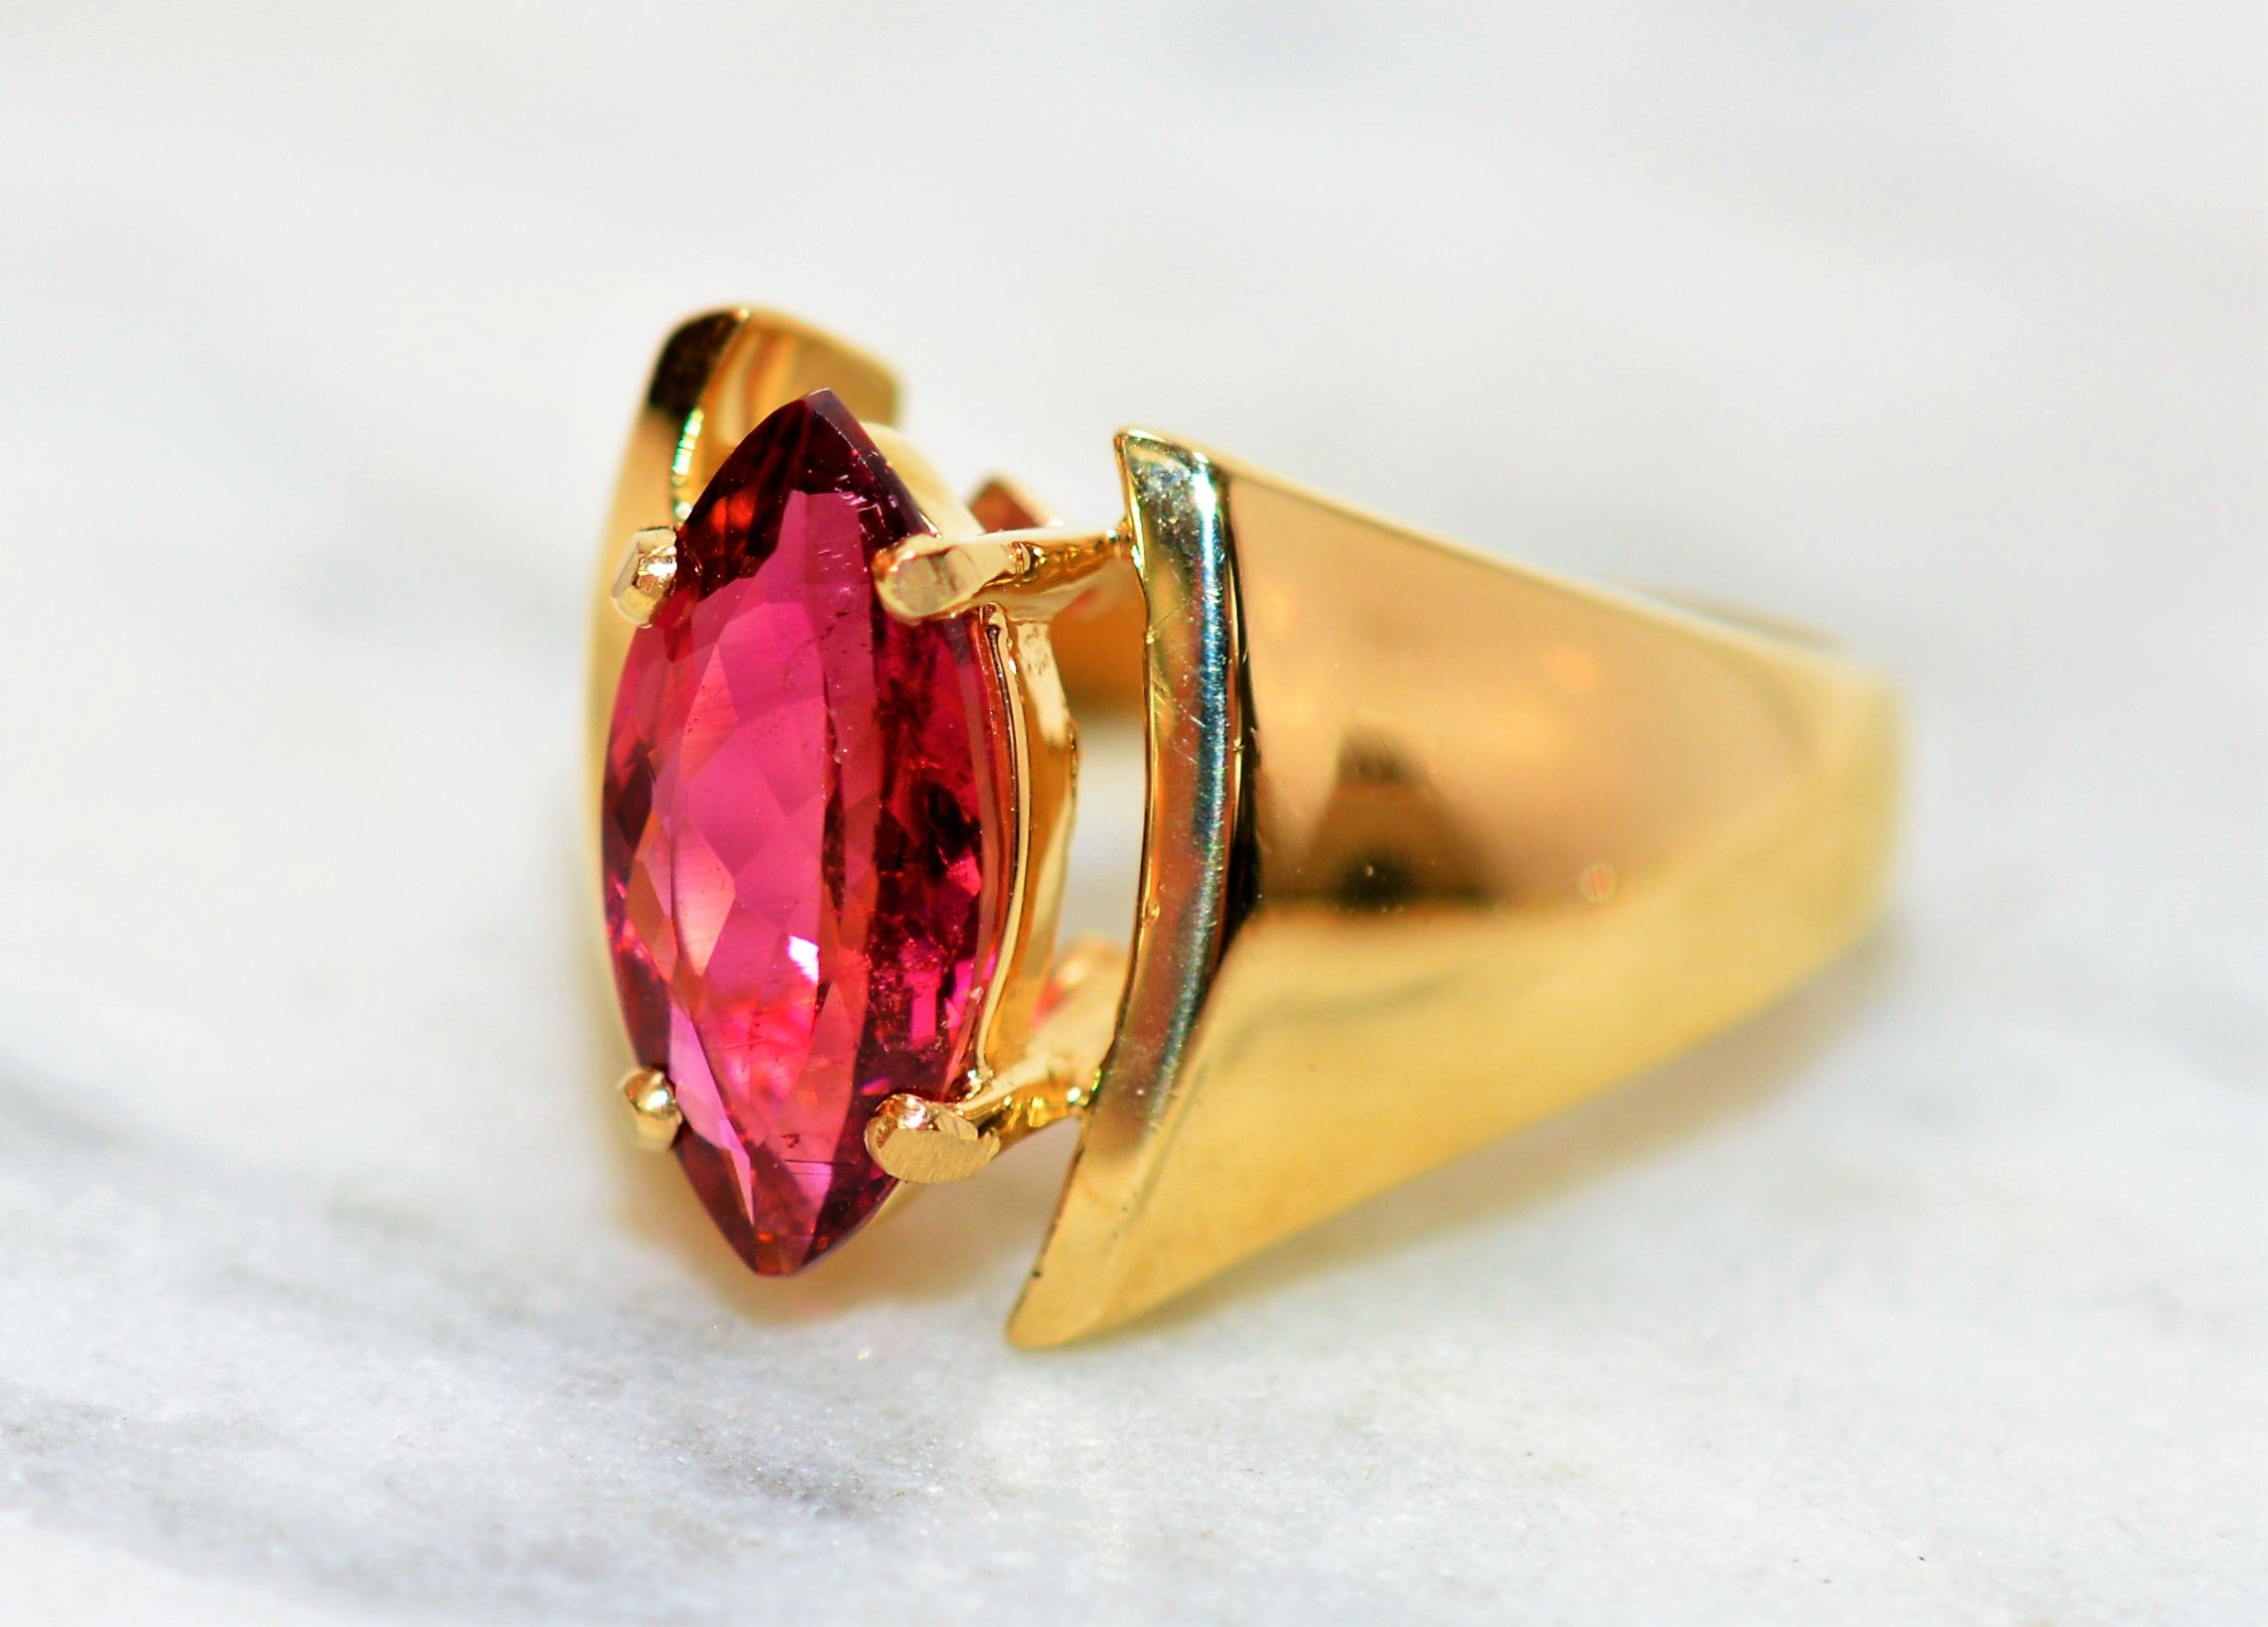 Natural Rubellite Ring 14K Solid Gold 1.92ct Pink Tourmaline Ring Solitaire Ring Cocktail Ring Gemstone Ring Womens Ring Ladies Ring Jewelry